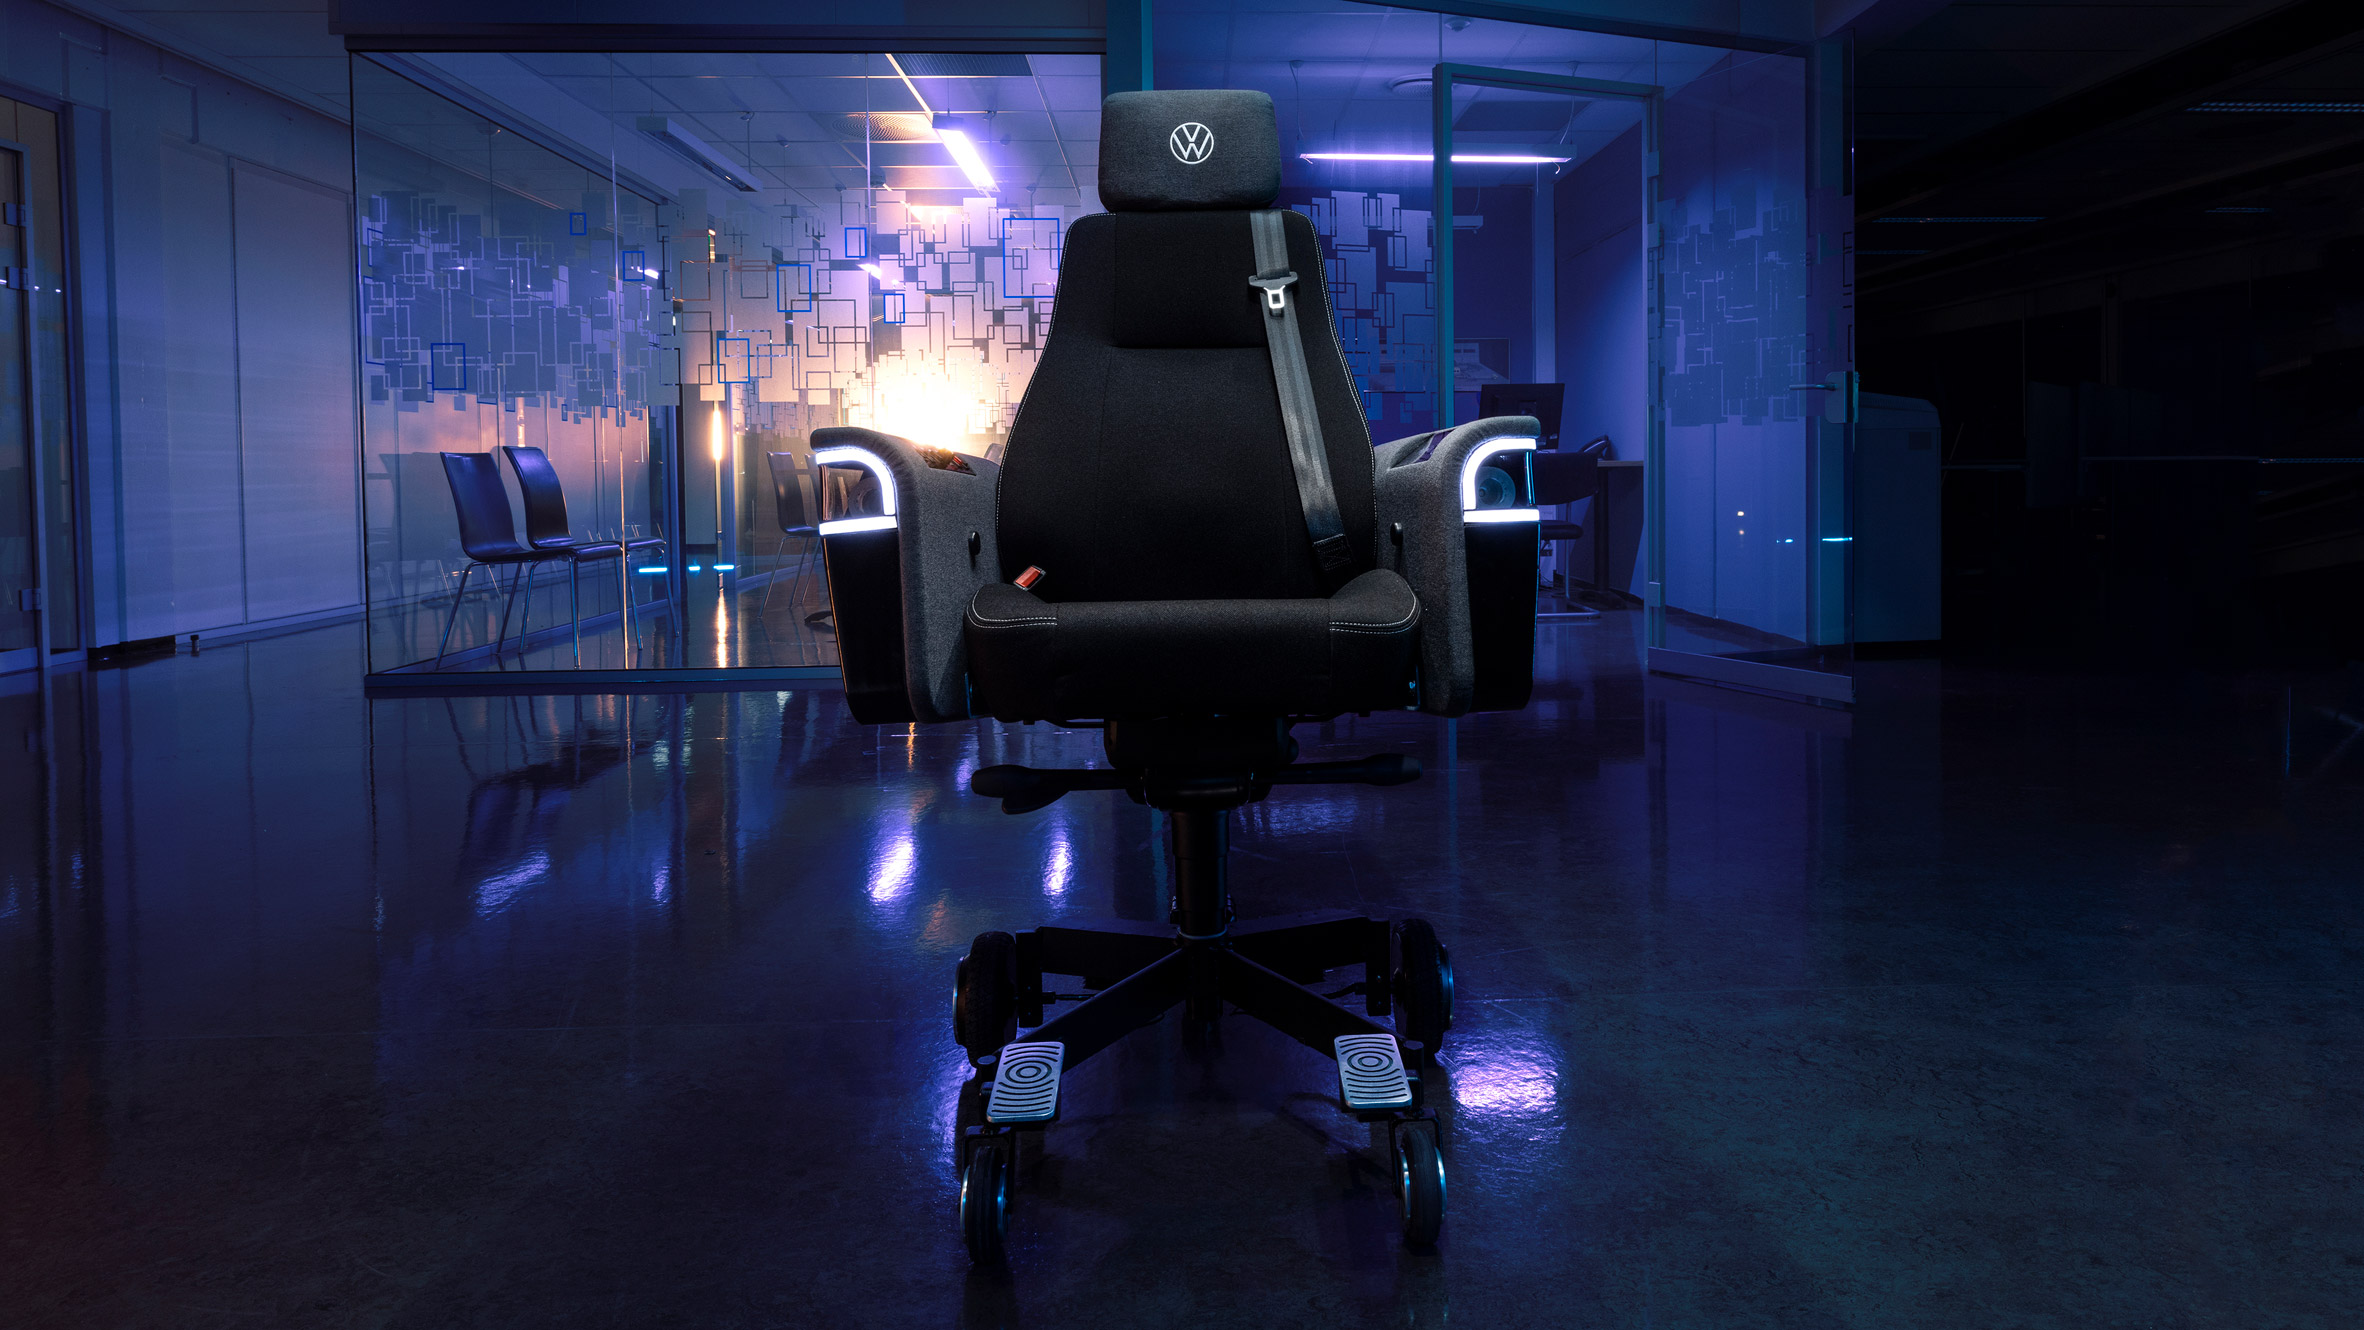 Volkswagen unveils office chair that can travel up to 20 kilometres per hour